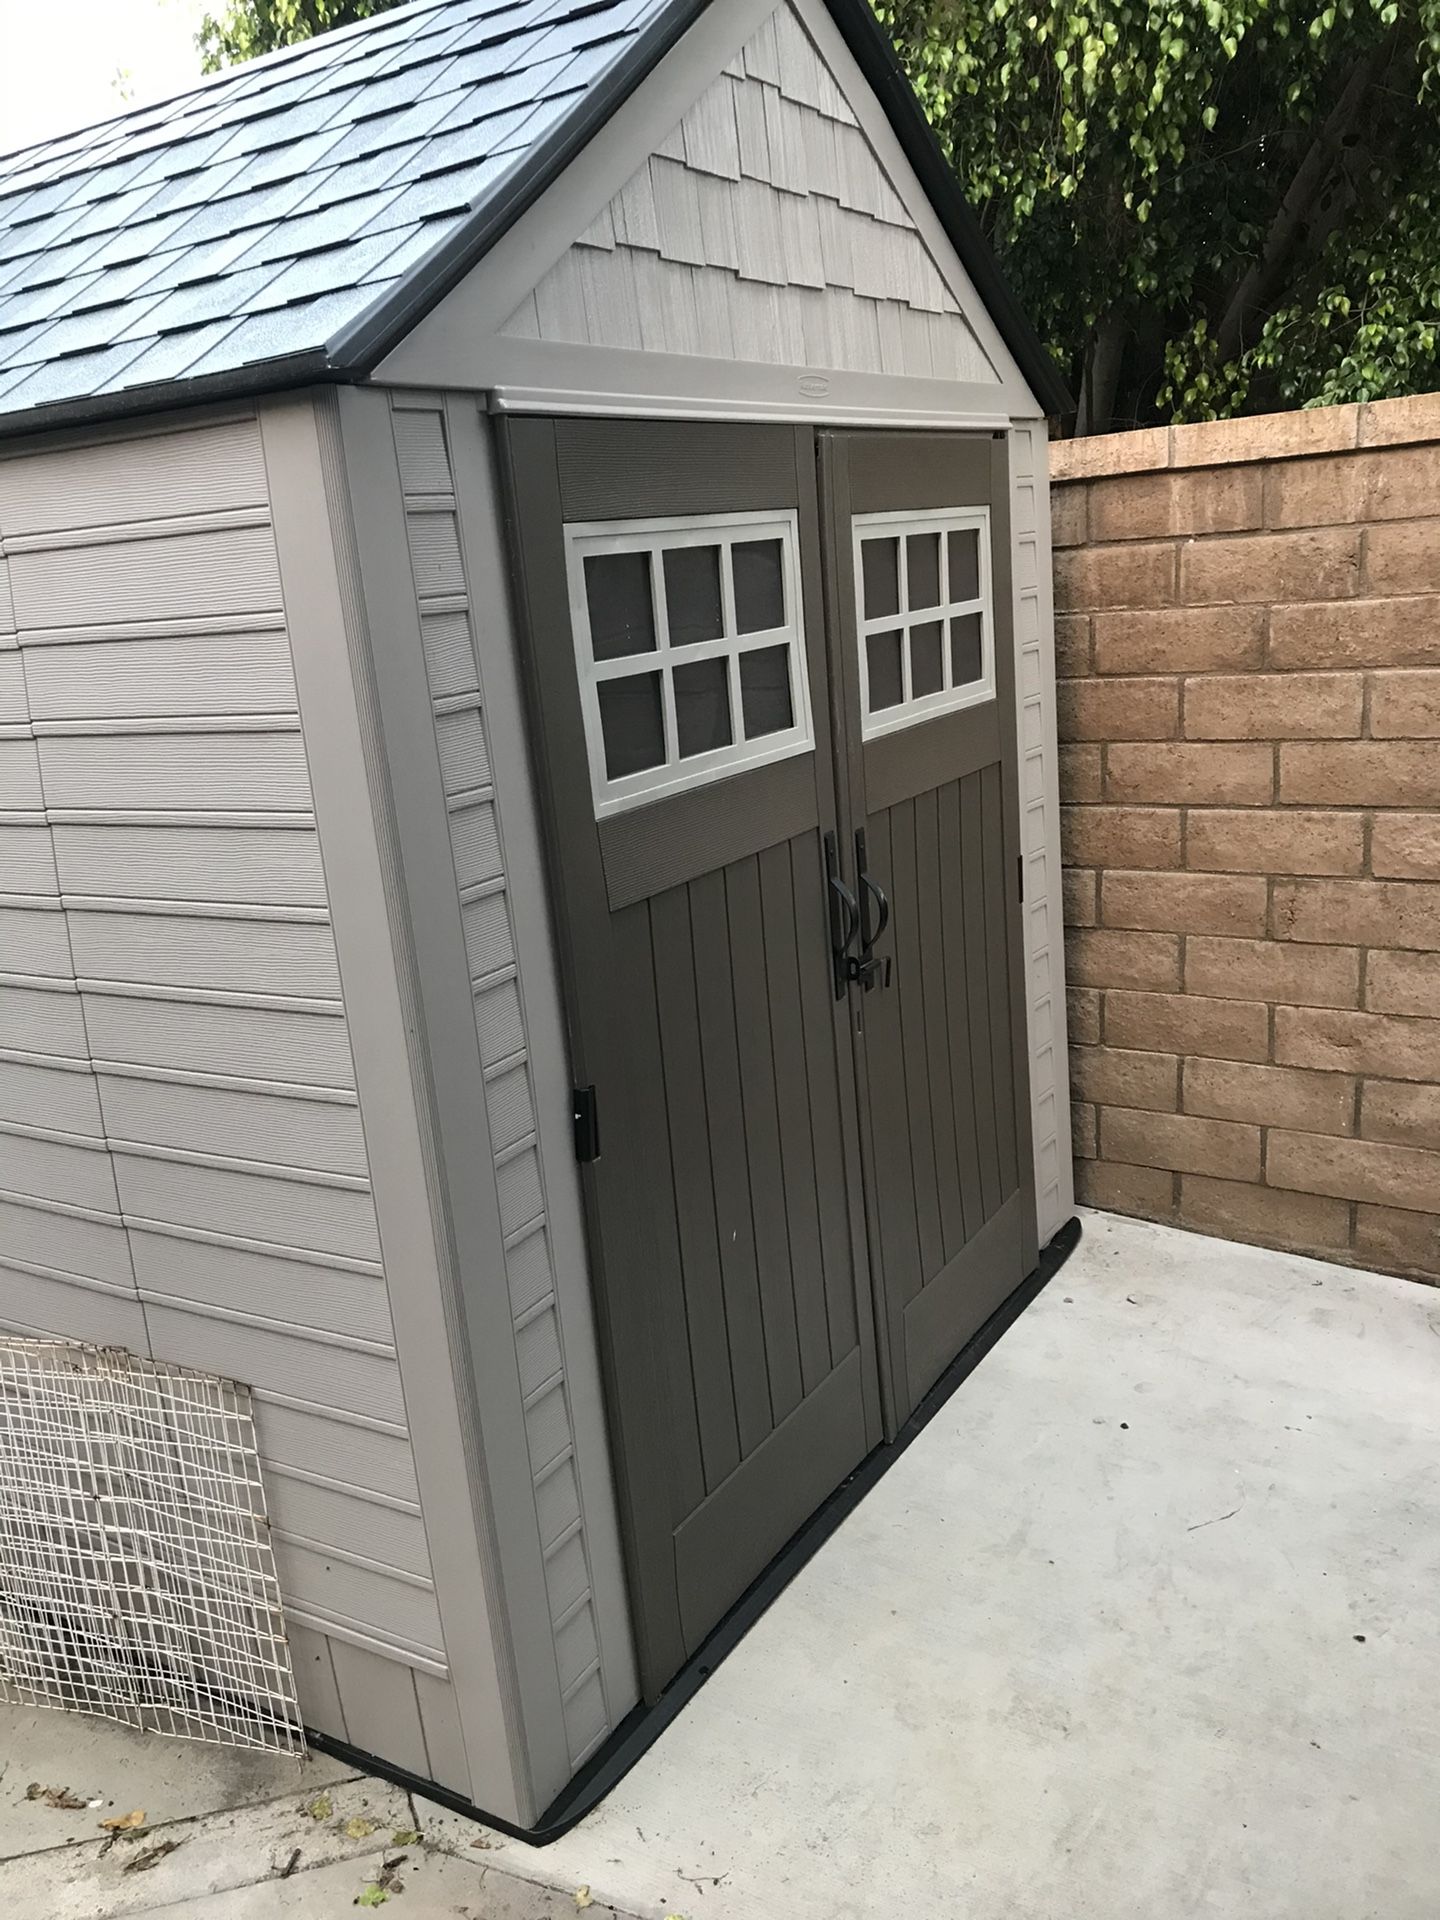 Rubbermaid 7x7 storage shed